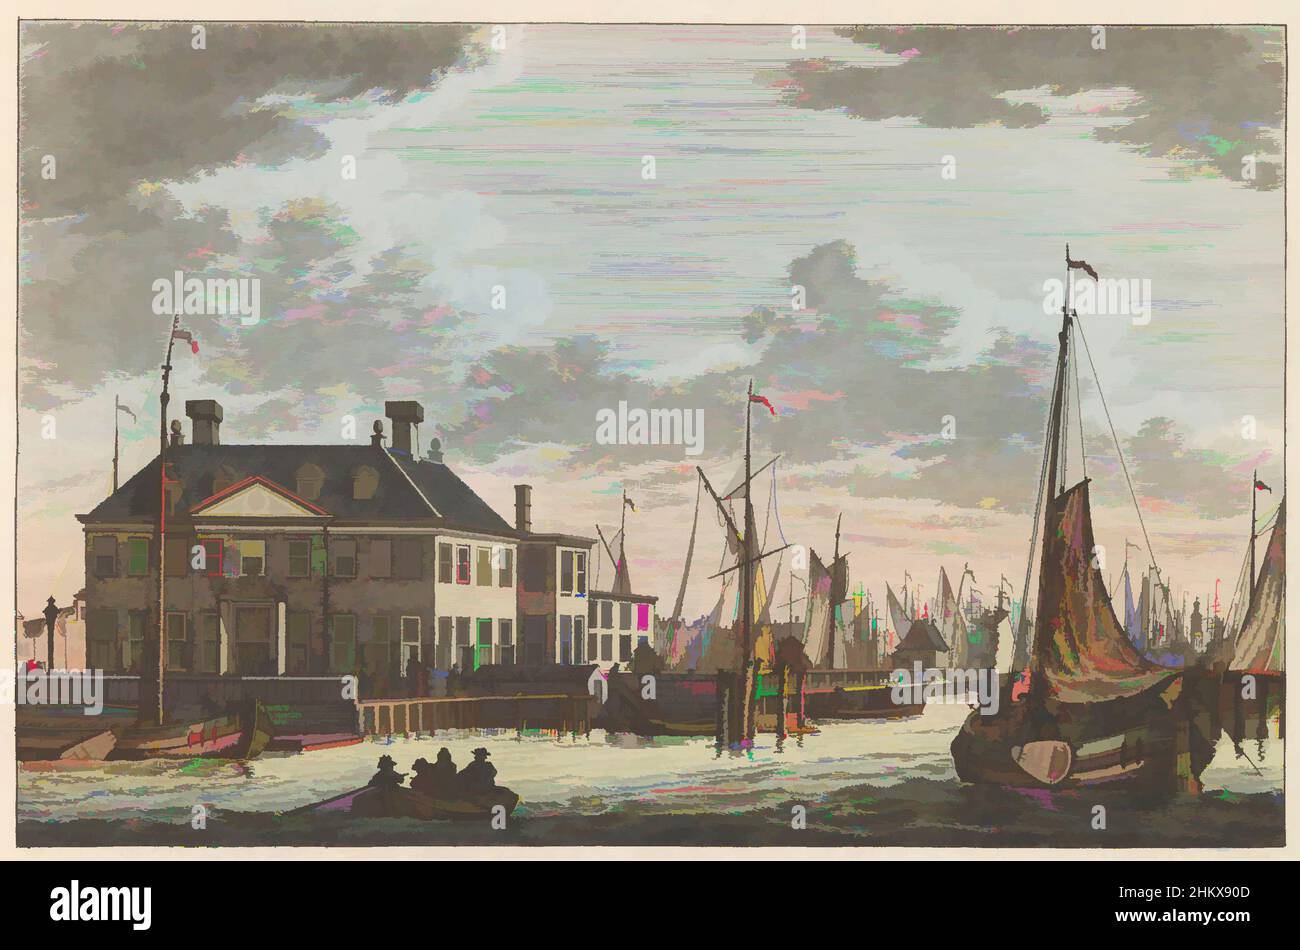 Art inspired by View of the Nieuwe Stadsherberg, ca. 1790, Nieuwe Stads-Herberg te Amsterdam, Vue de L'Edifice dite Nieuwe Stadsherberg - passage pour le Nord-hollande et Endroite au arrive les Barques de Buiksloot, De Nieuwe Stadsherberg te Amsterdam, ca. 1790. Part of a plate work, Classic works modernized by Artotop with a splash of modernity. Shapes, color and value, eye-catching visual impact on art. Emotions through freedom of artworks in a contemporary way. A timeless message pursuing a wildly creative new direction. Artists turning to the digital medium and creating the Artotop NFT Stock Photo